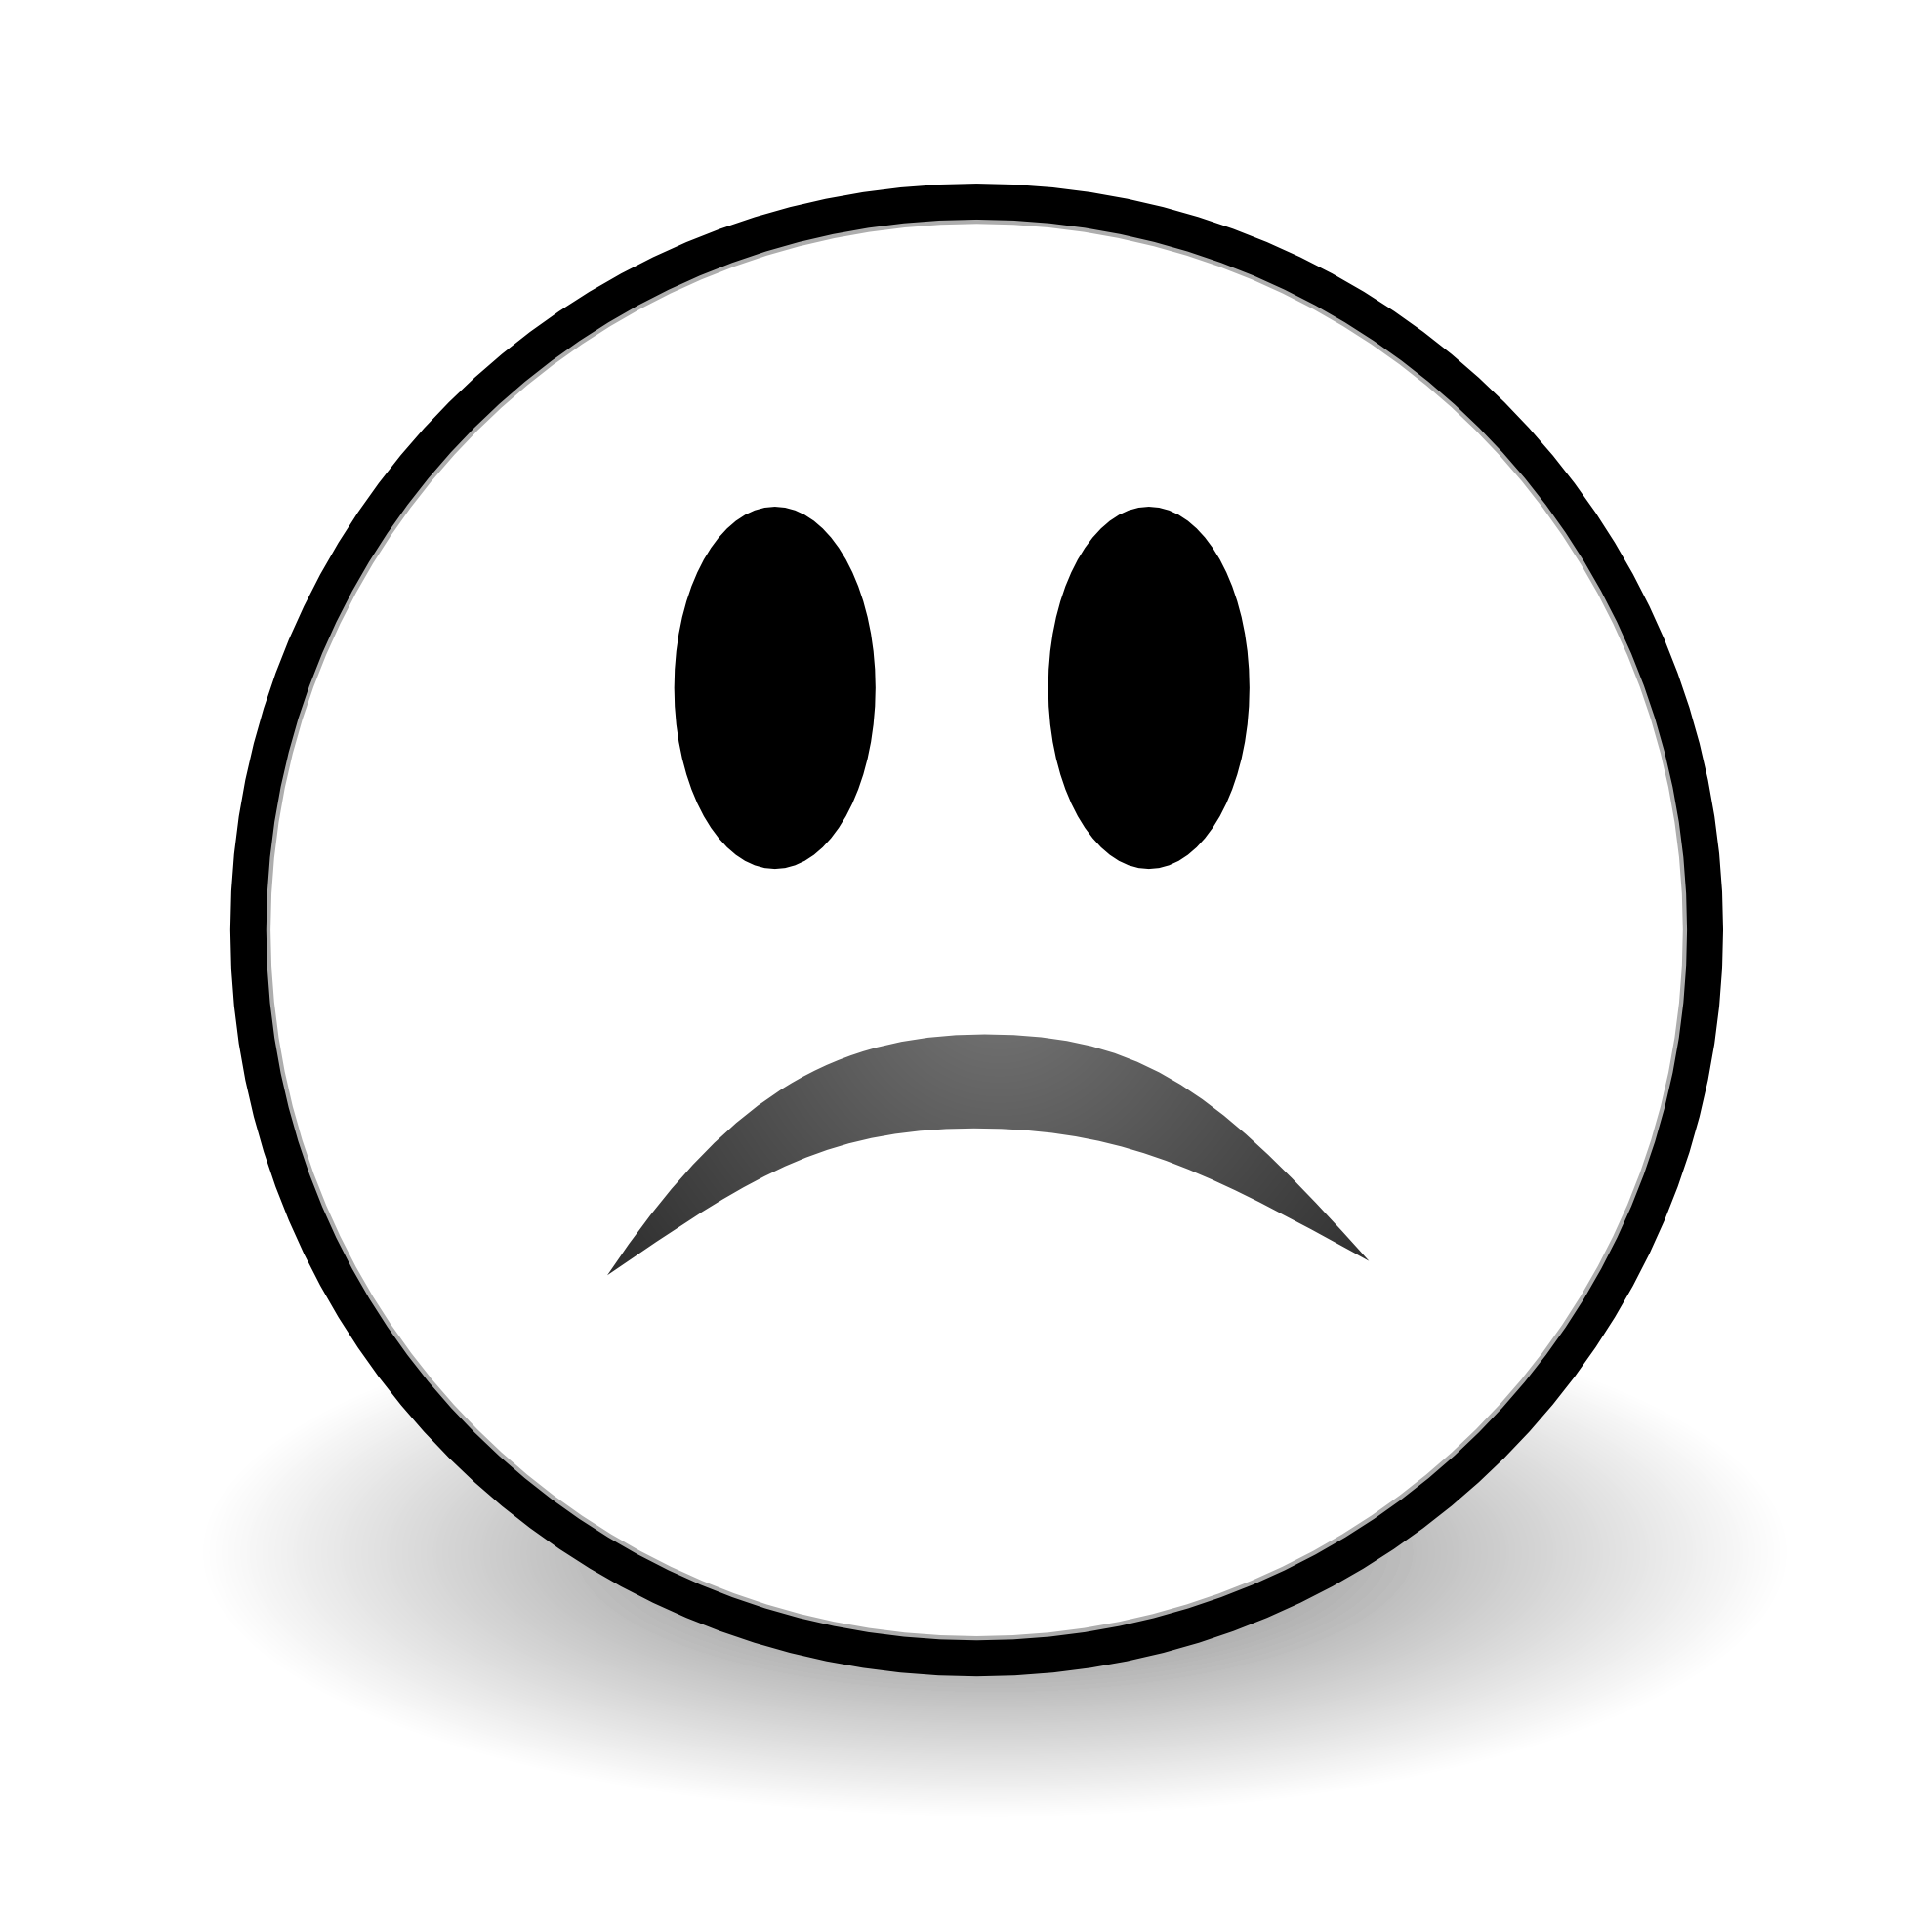 angry face black and white clipart